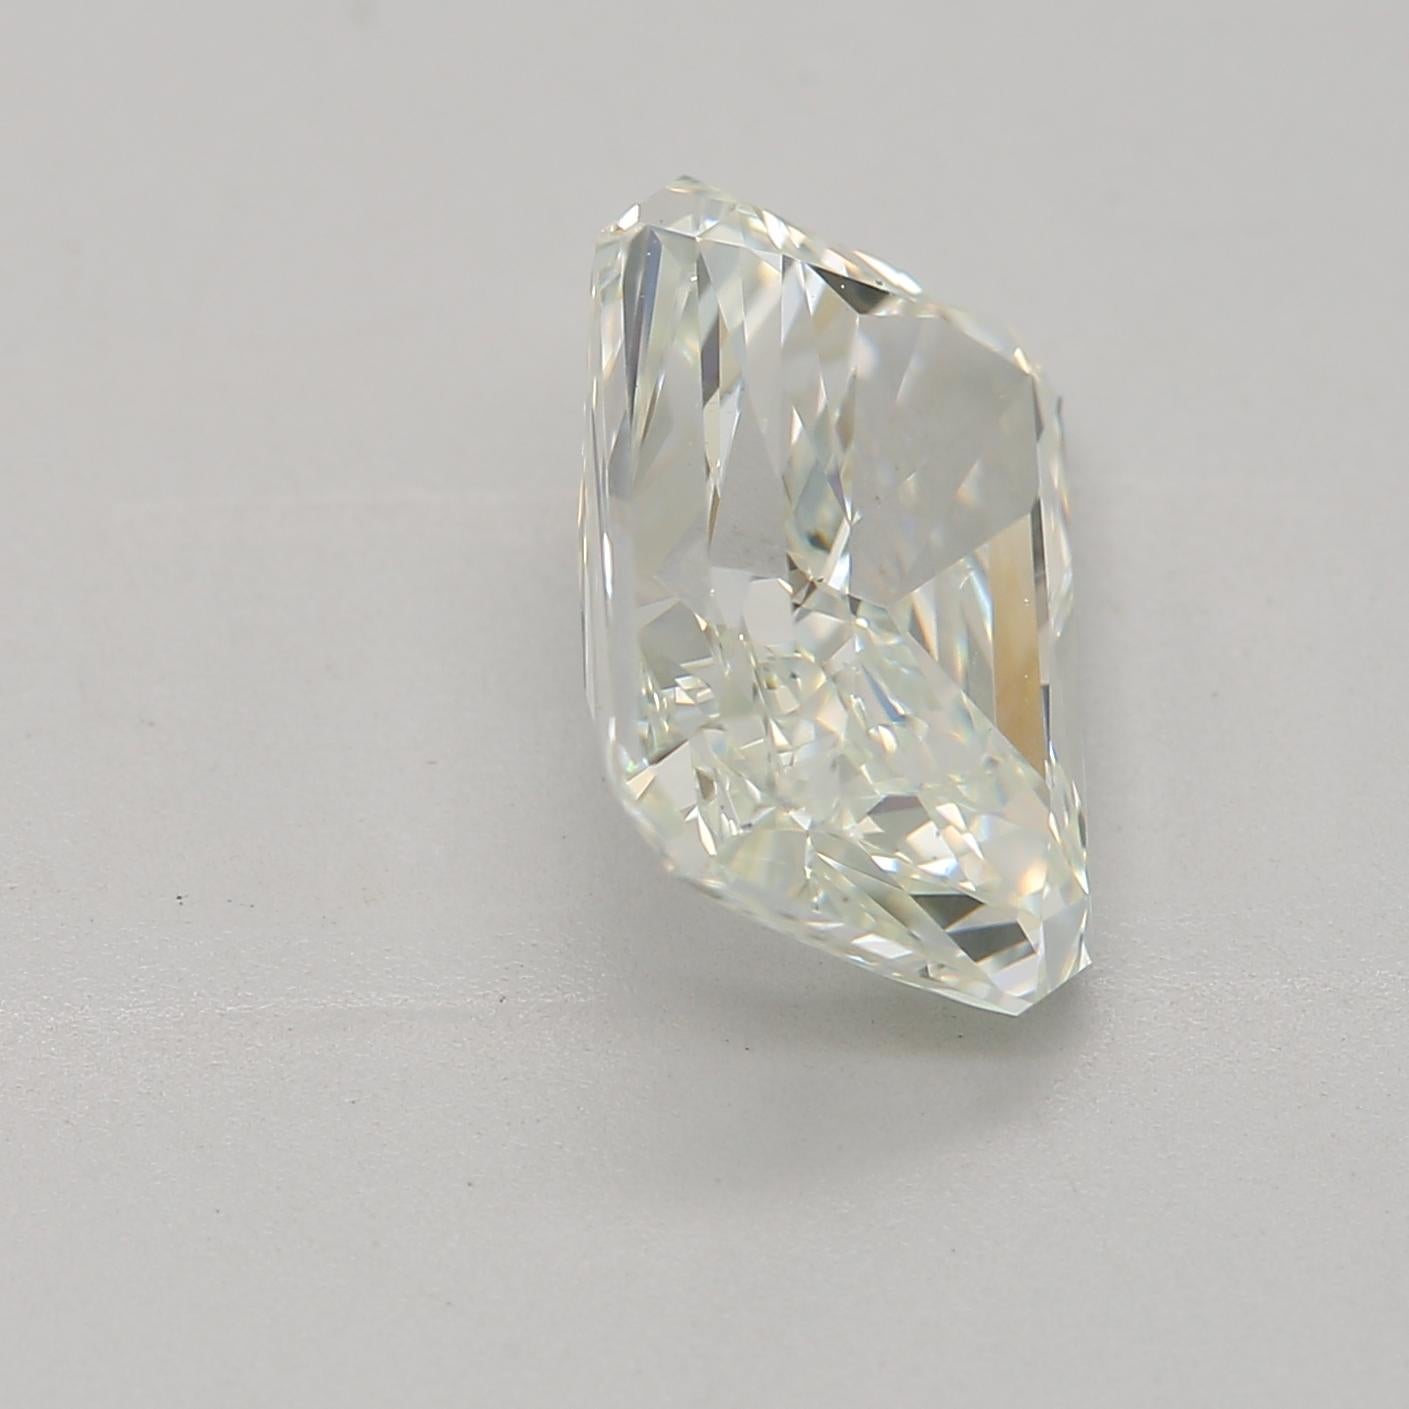 2.00 Carat Very Light Green Radiant Cut Diamond SI1 Clarity GIA Certified For Sale 1